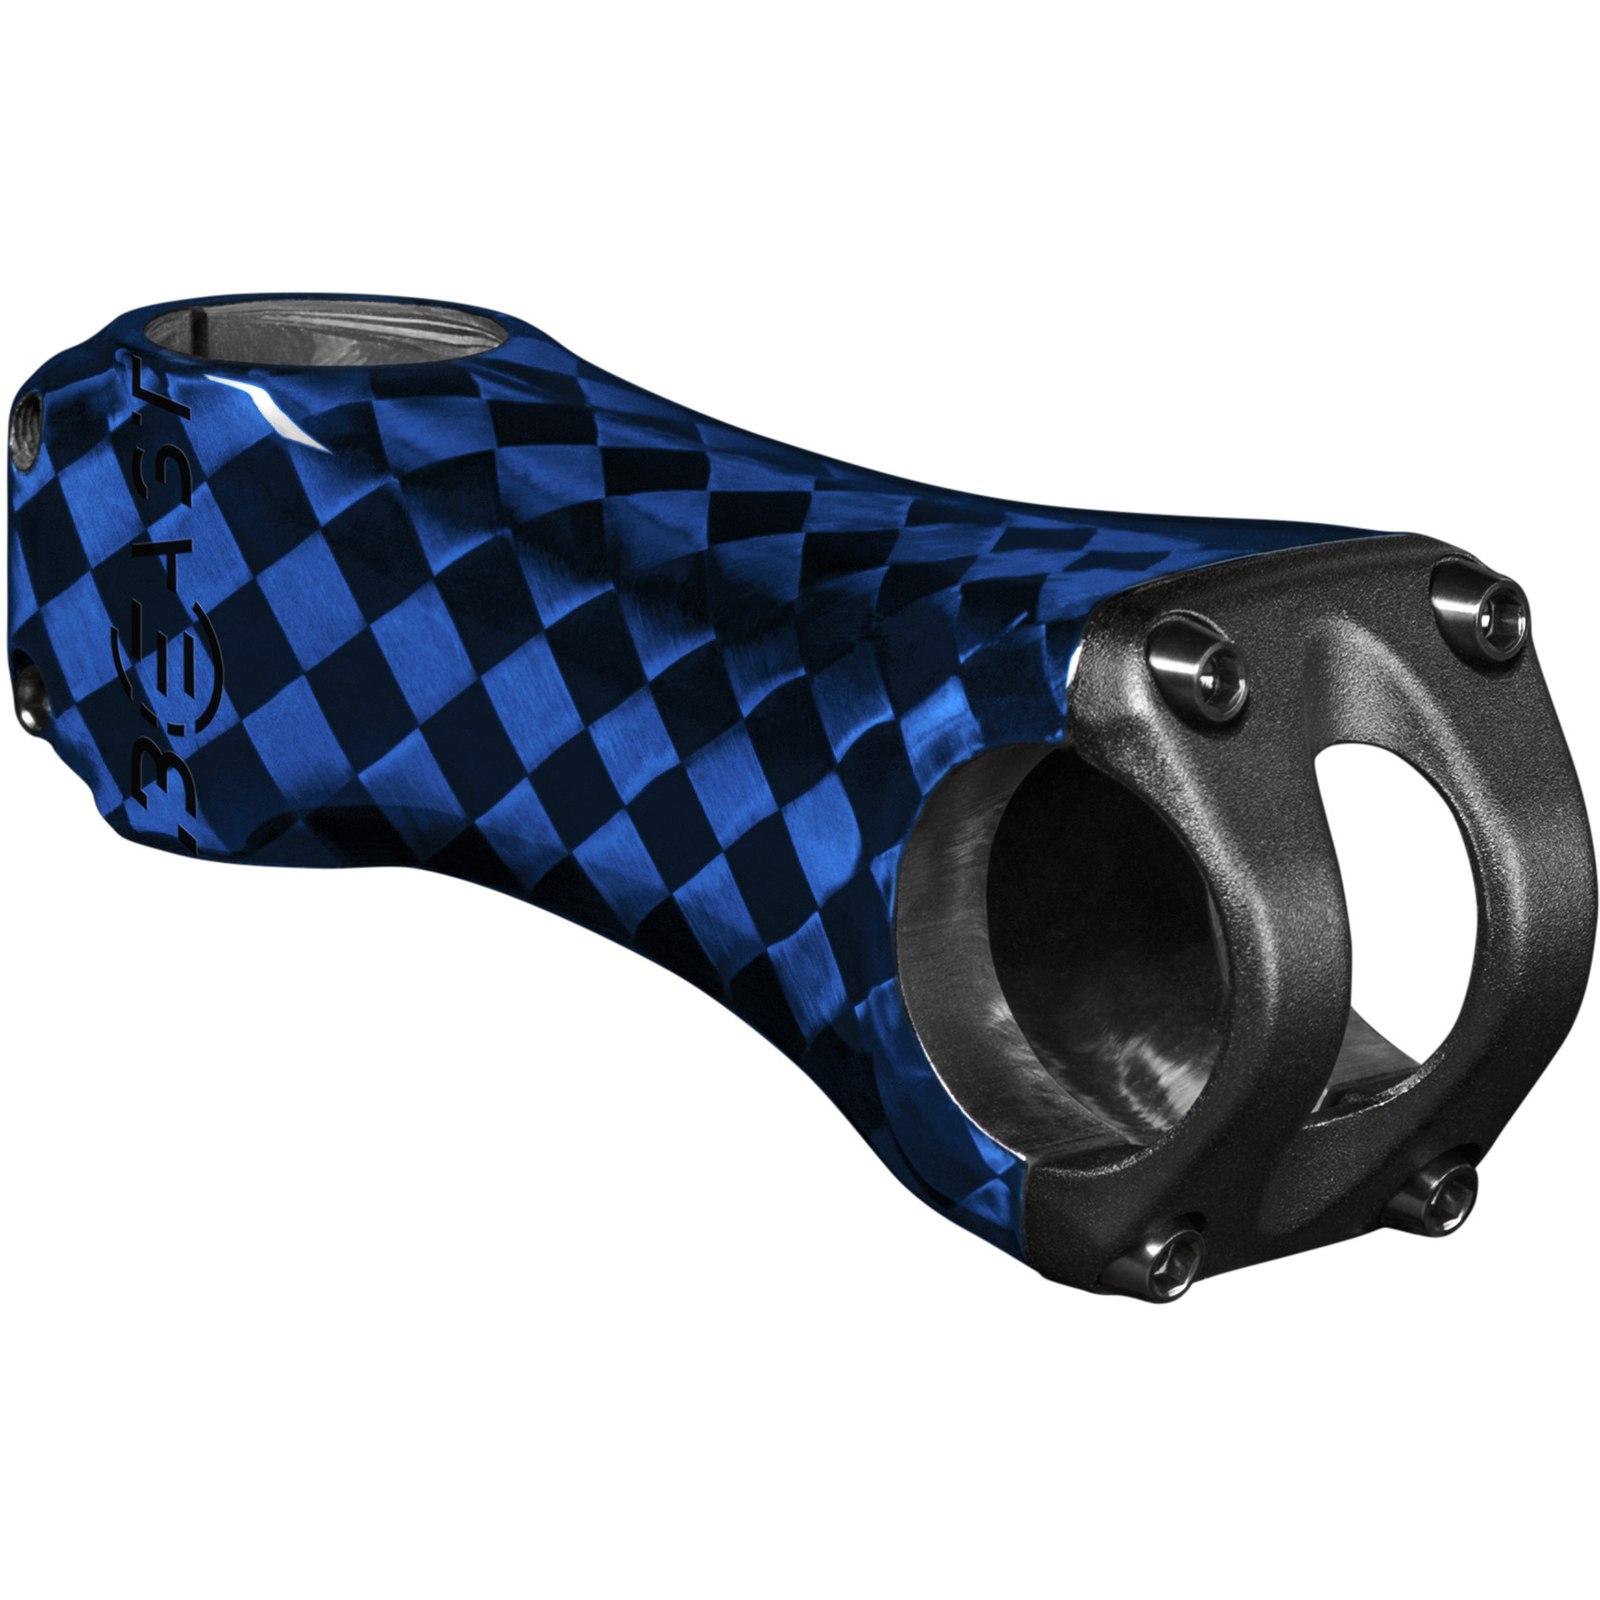 Picture of Beast Components Road Carbon Stem 31.8mm - 6° - SQUARE blue